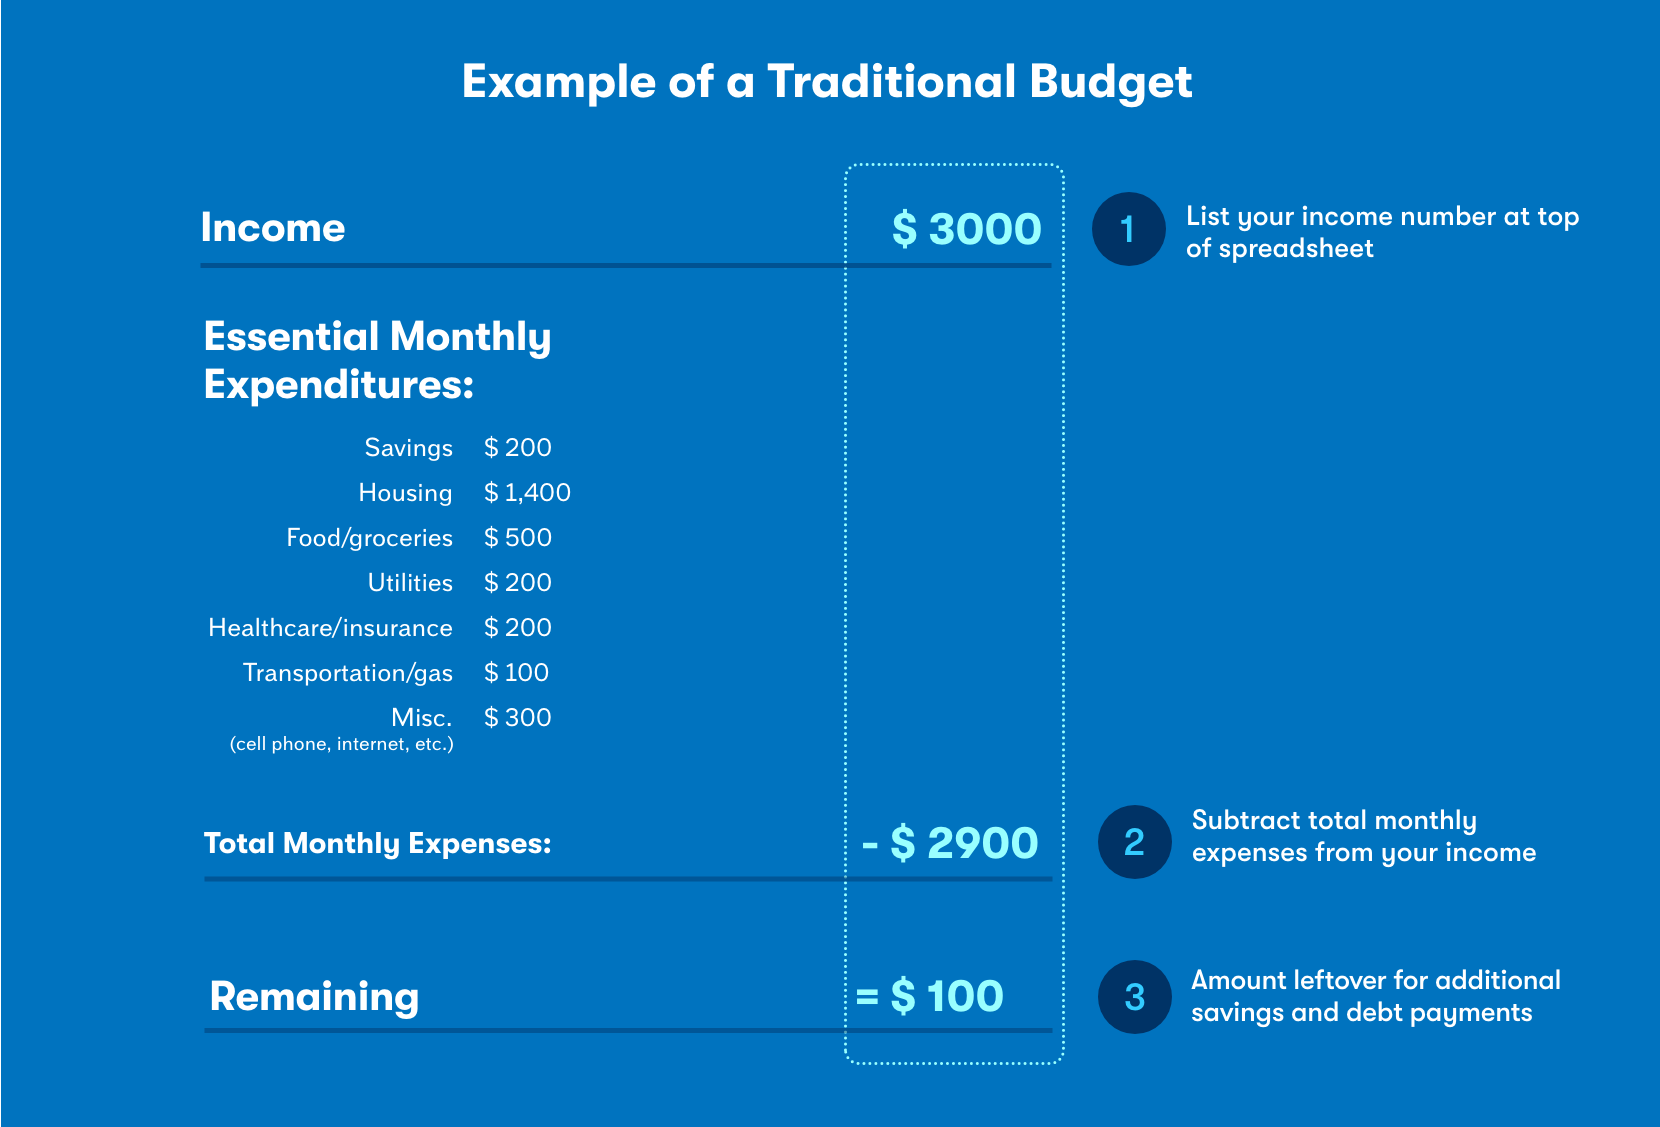 Example of a traditional budget showing income minus monthly expenses